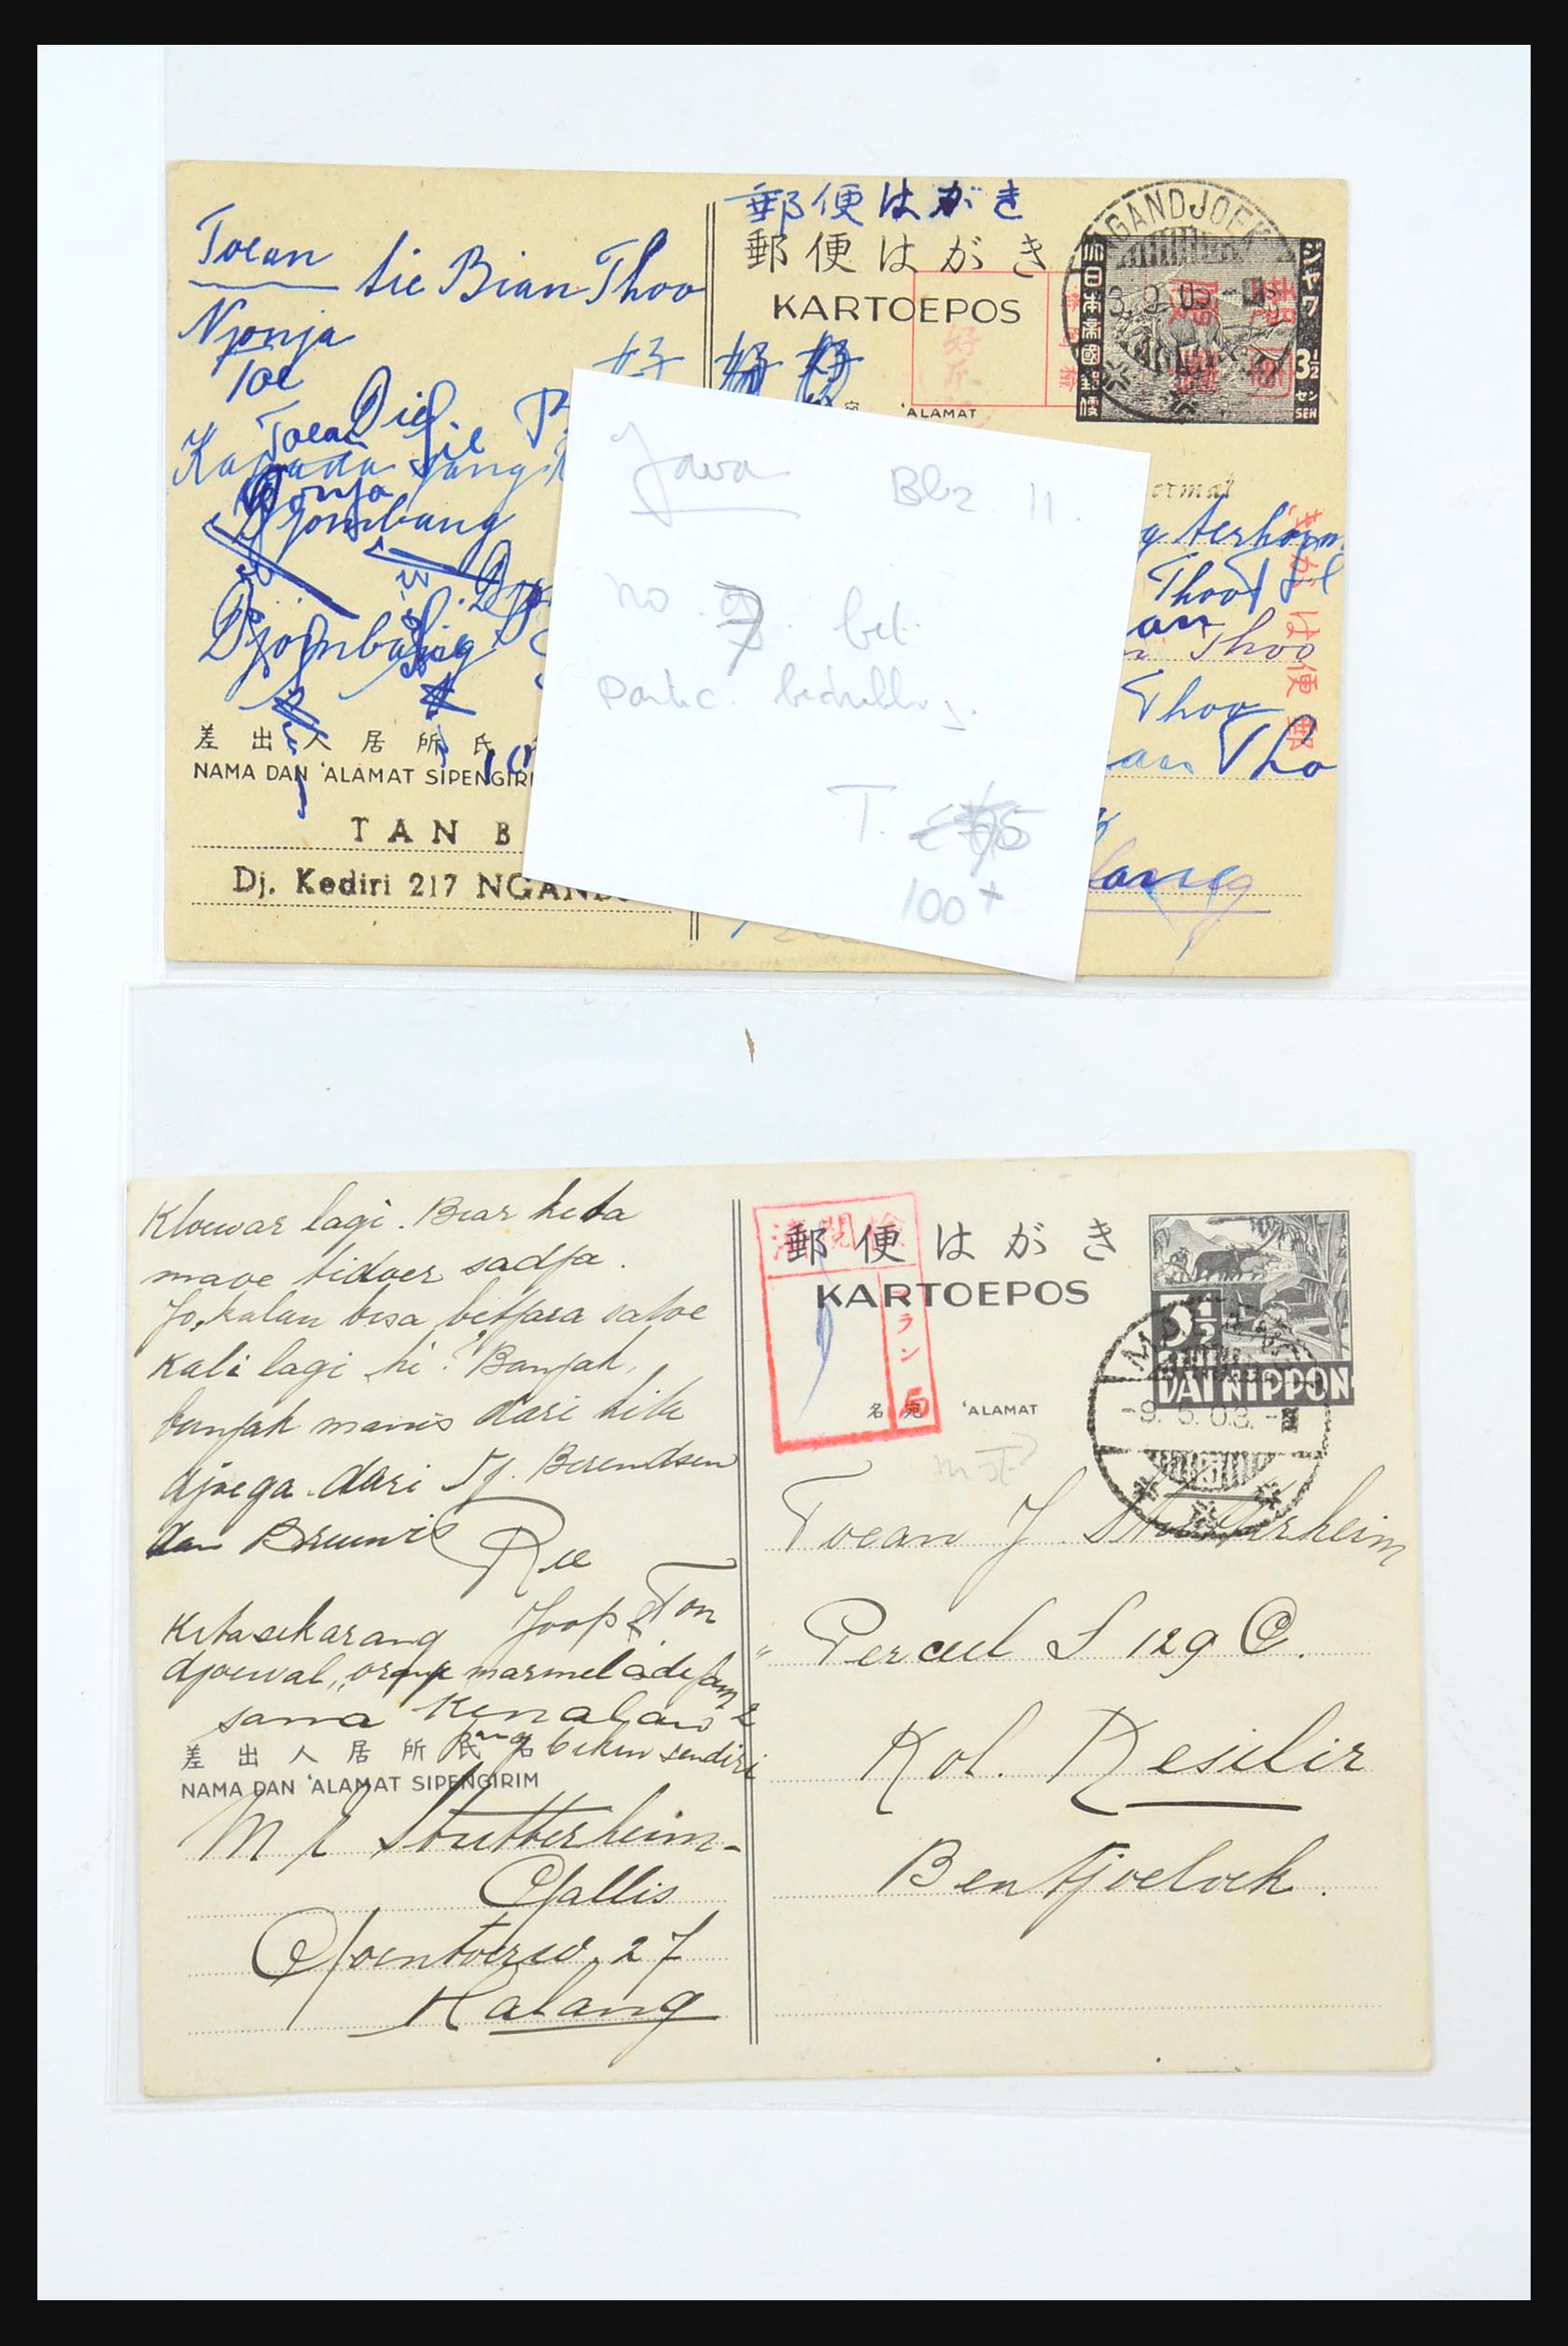 31362 094 - 31362 Netherlands Indies Japanese occupation covers 1942-1945.